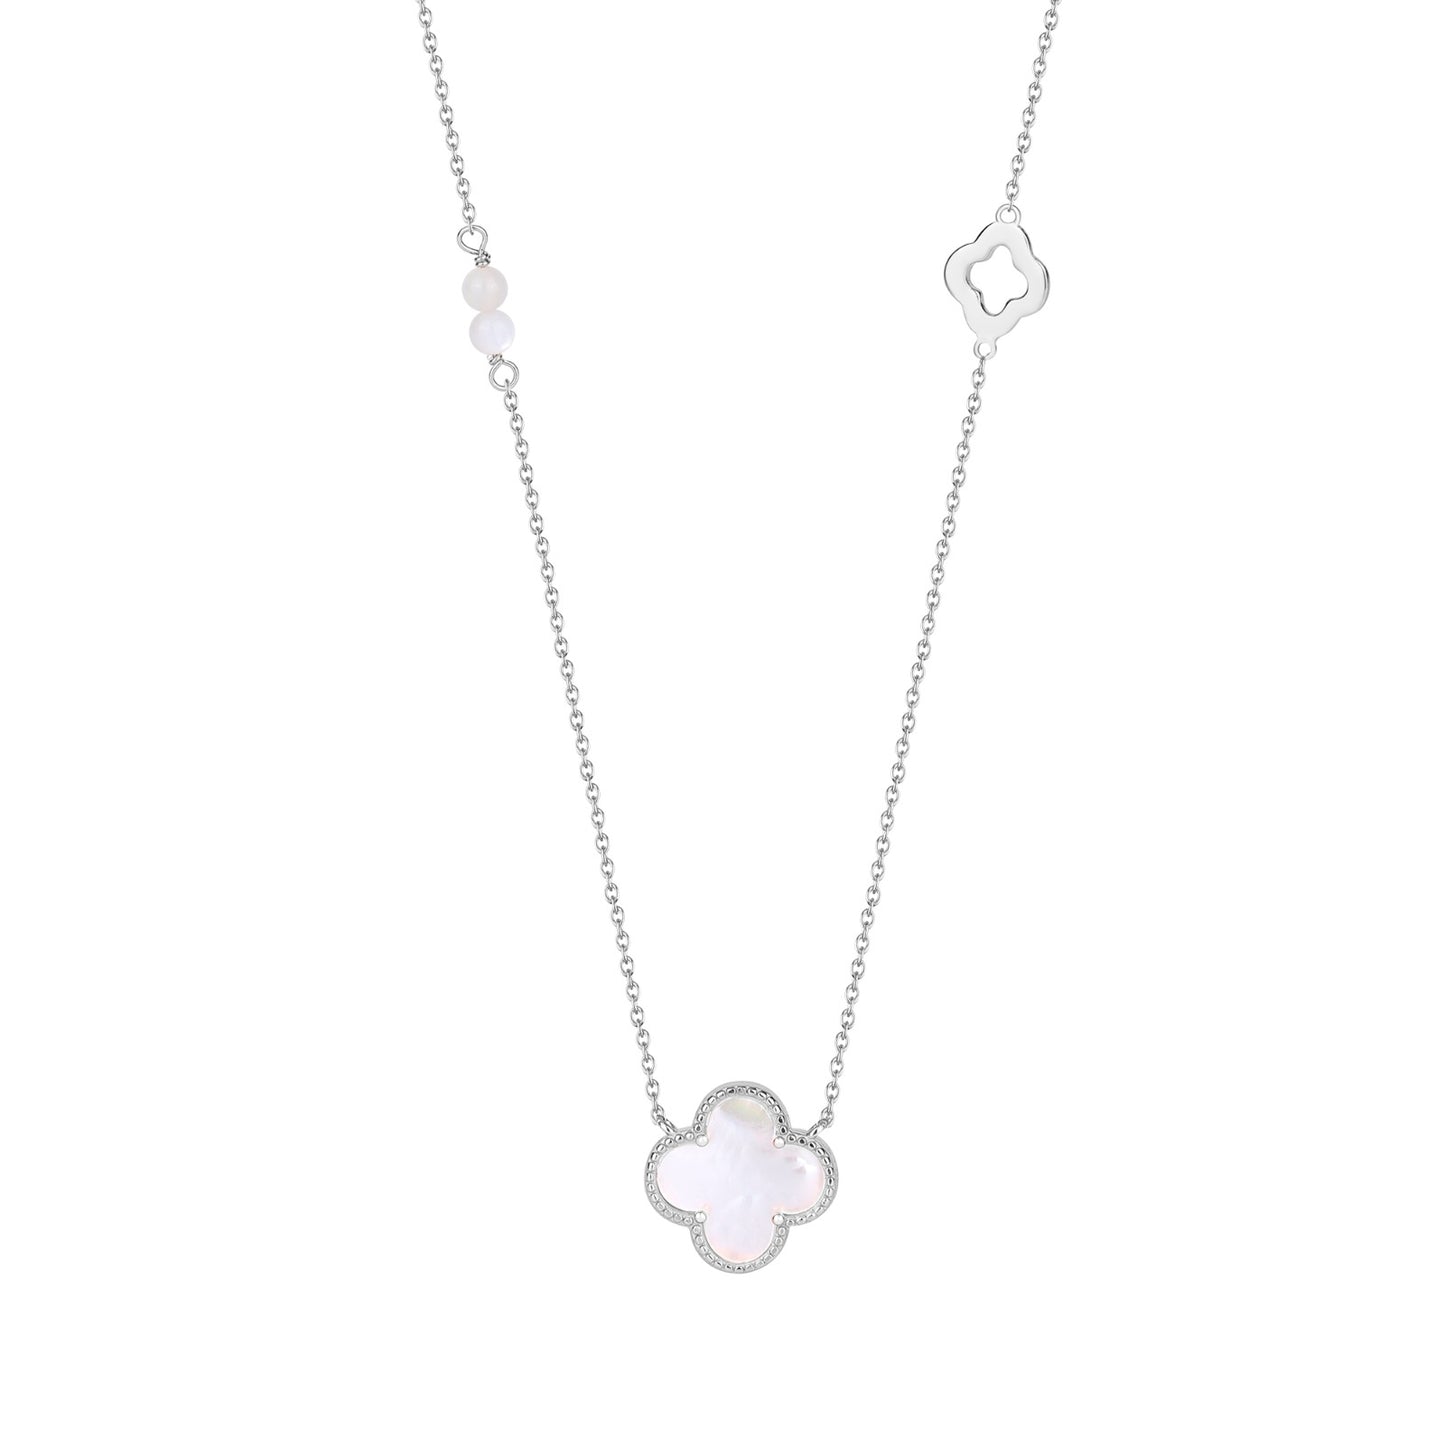 KARA MOTHER OF PEARL CLOVER SILVER NECKLACE